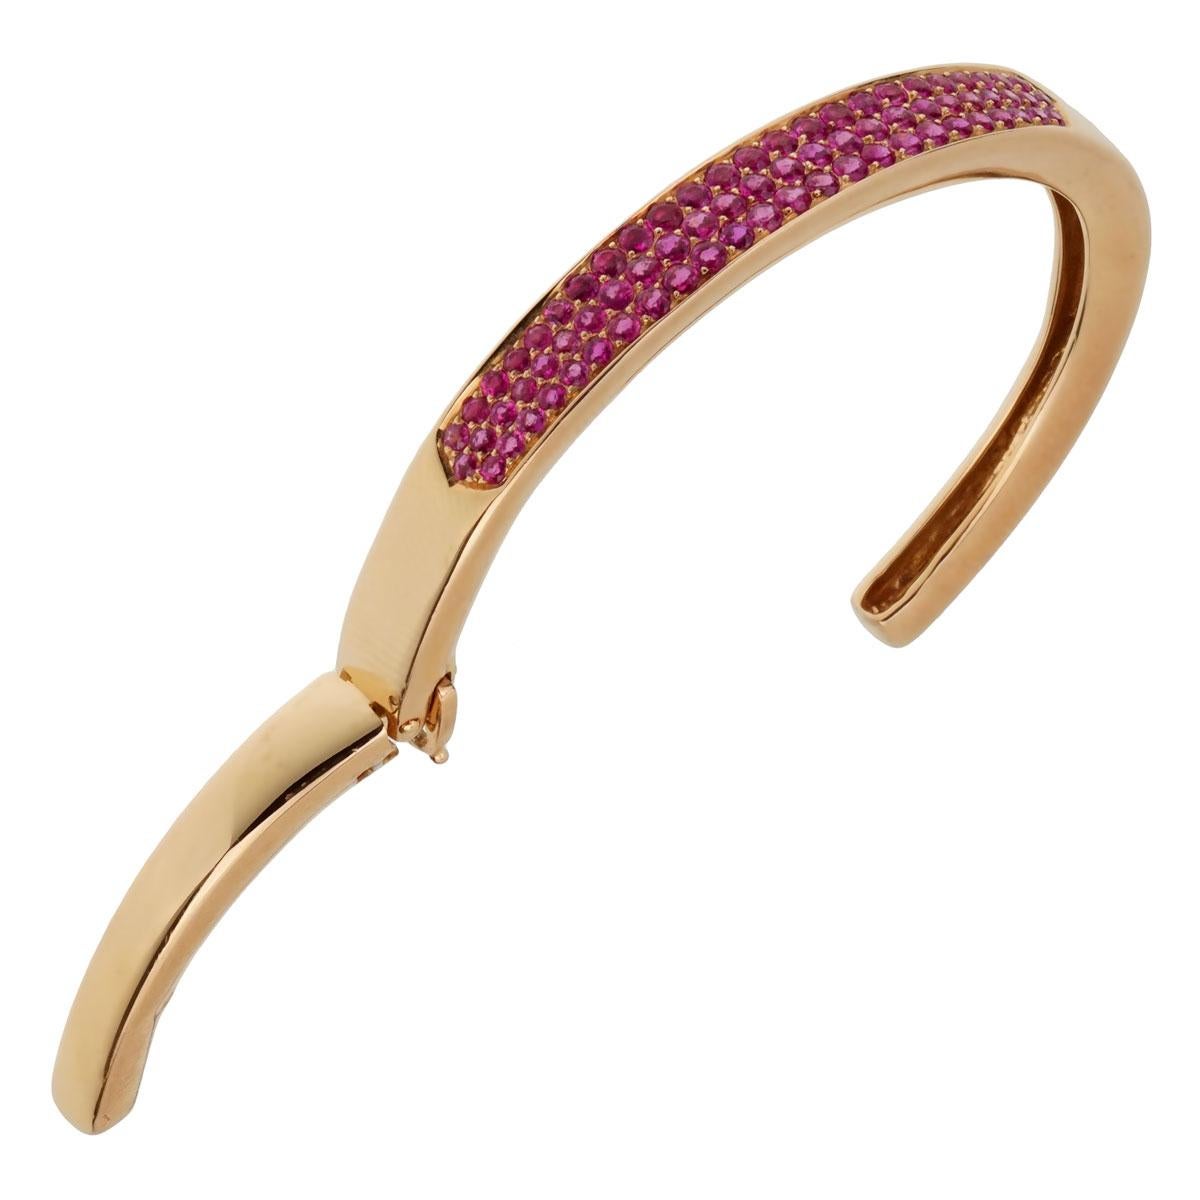 A fabulous Van Cleef & Arpels bracelet circa 1980, this luxurious bracelet features 3 rows of vivid pink sapphires set in shimmering 18k rose gold.